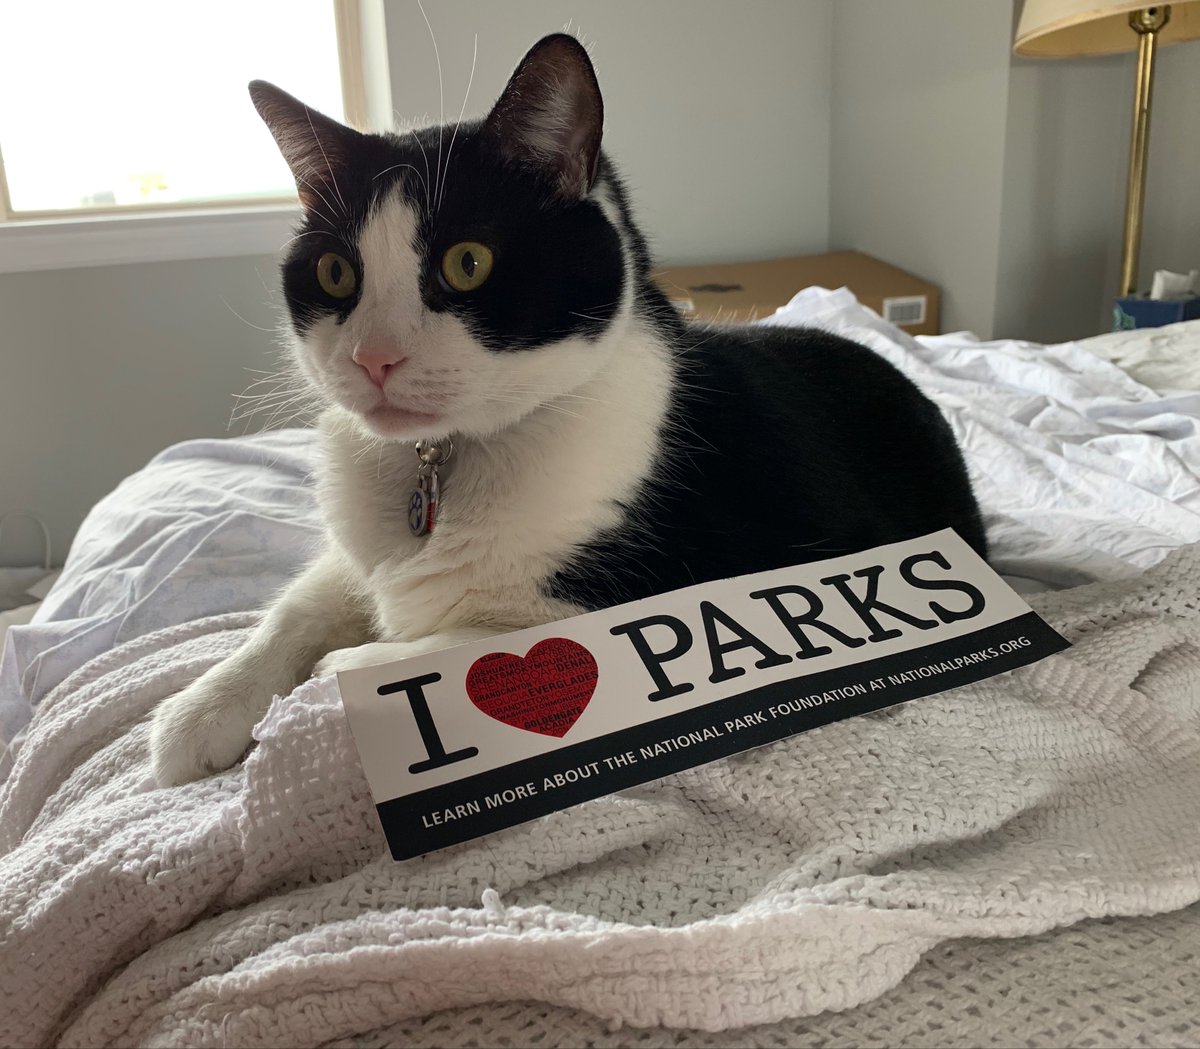 Say hello to Archie. Archie is head of HR (Hairball Resources) and has a Master's degree in Very Important Cat Business. His favorite  @NatlParkService site is Eisenmeower National Historic Site. #FindYourPark  #EncuentraTuParque